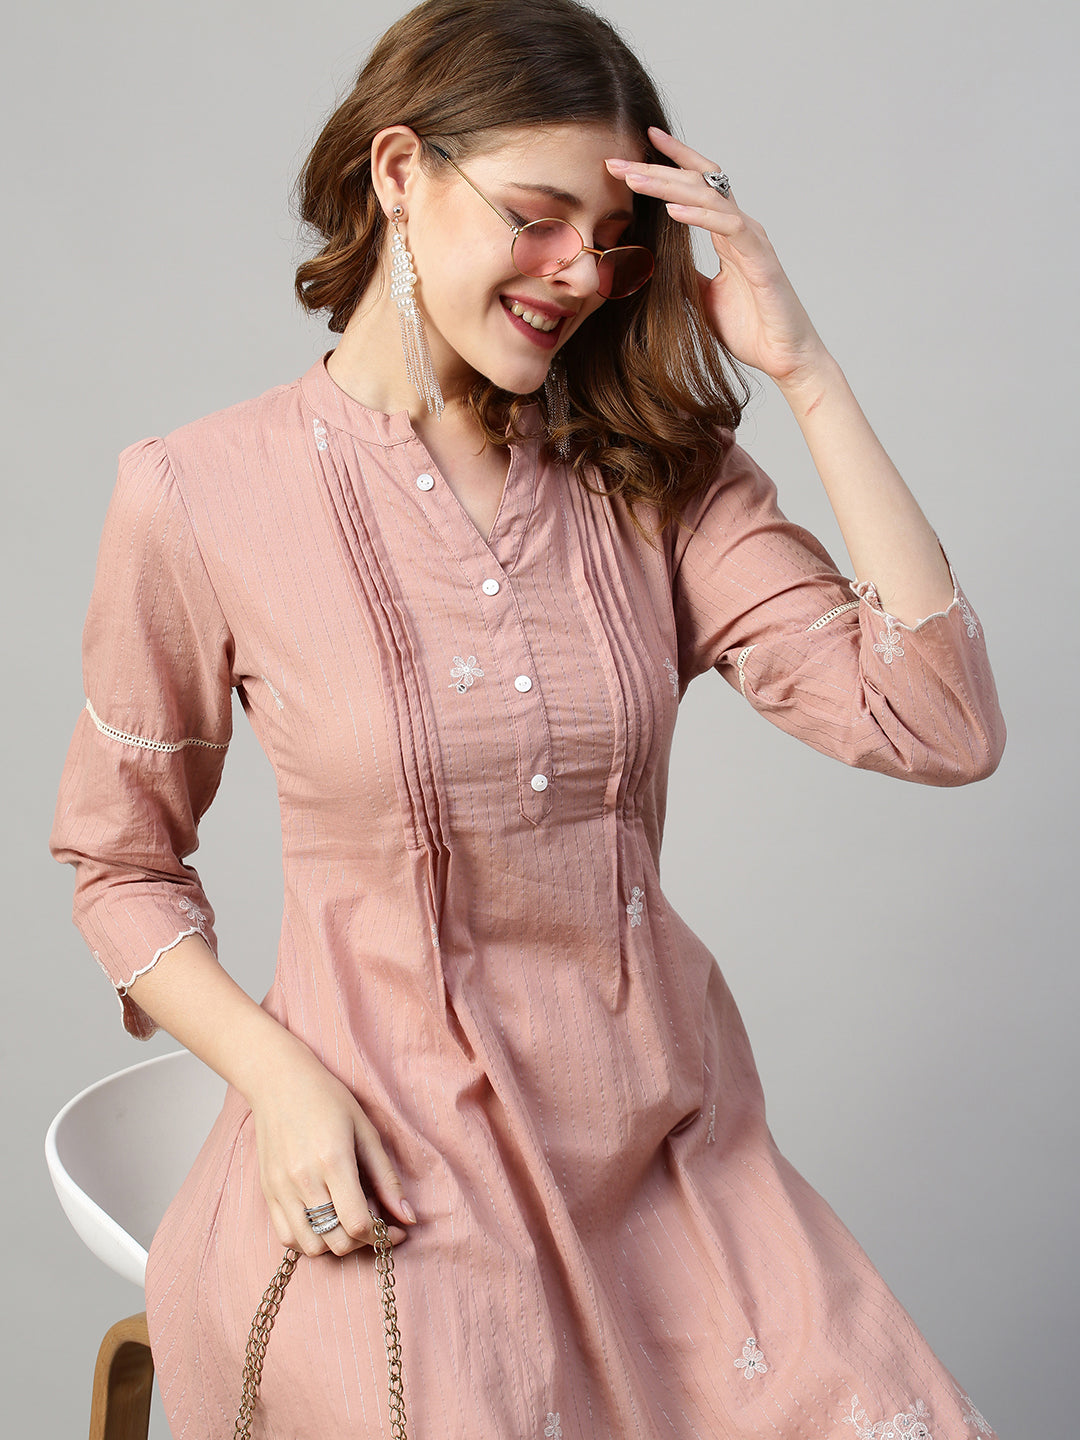 Floral Embroidered & Lurex Striped A-Line Kurta with Pants - Pastel Brown